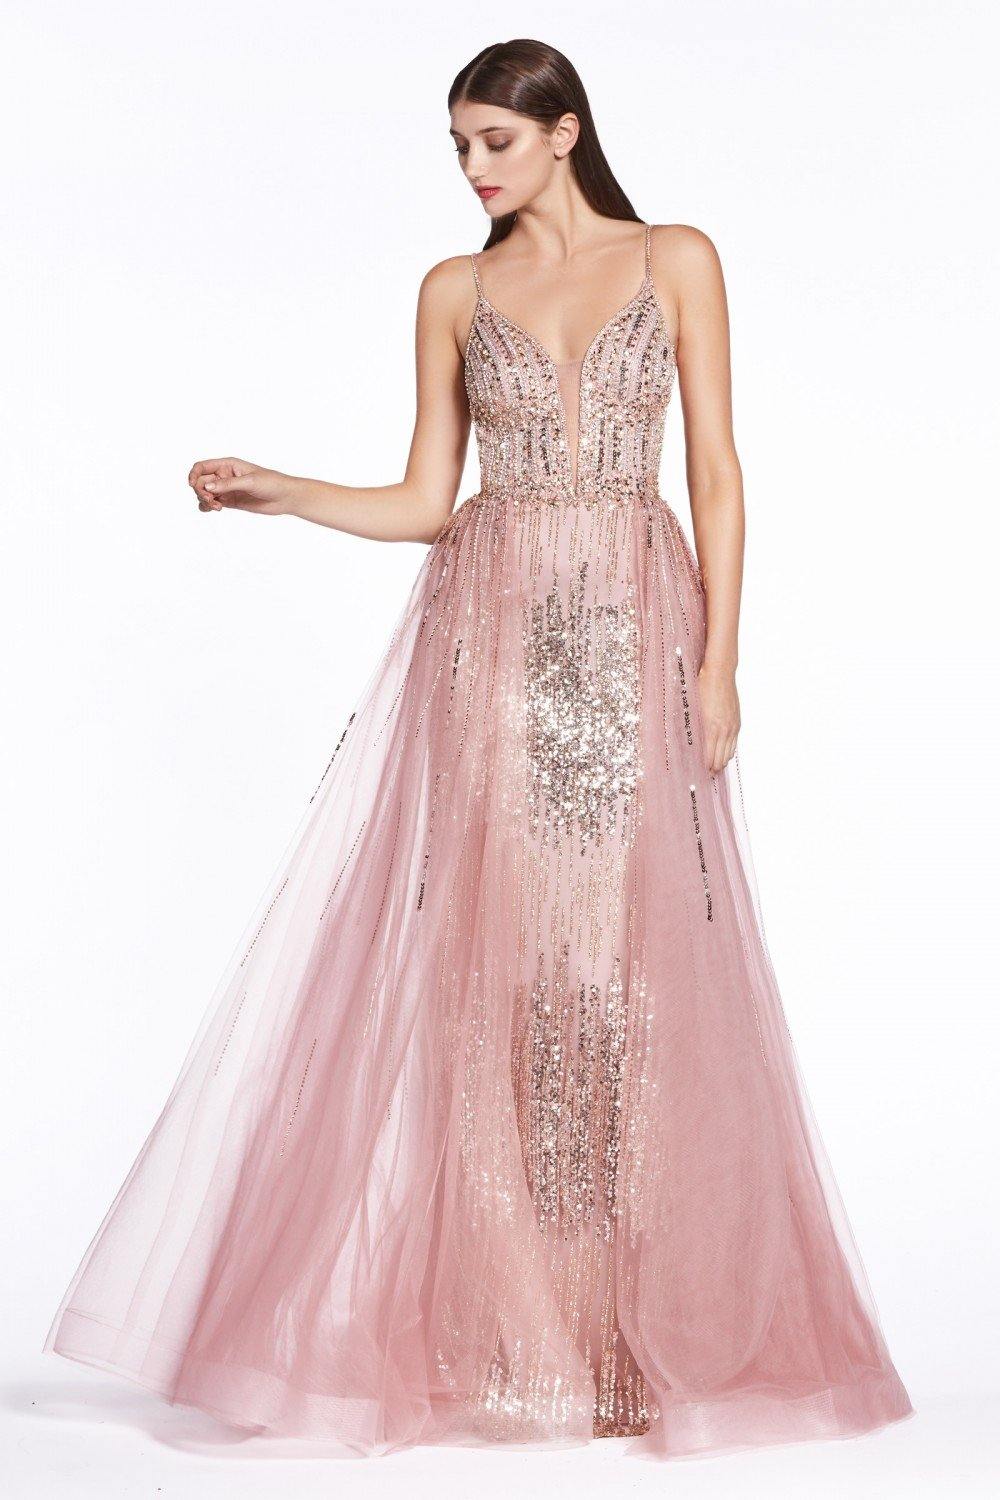 Long Evening Gown Spaghetti Strap Sexy Prom Dress - The Dress Outlet Cinderella Divine